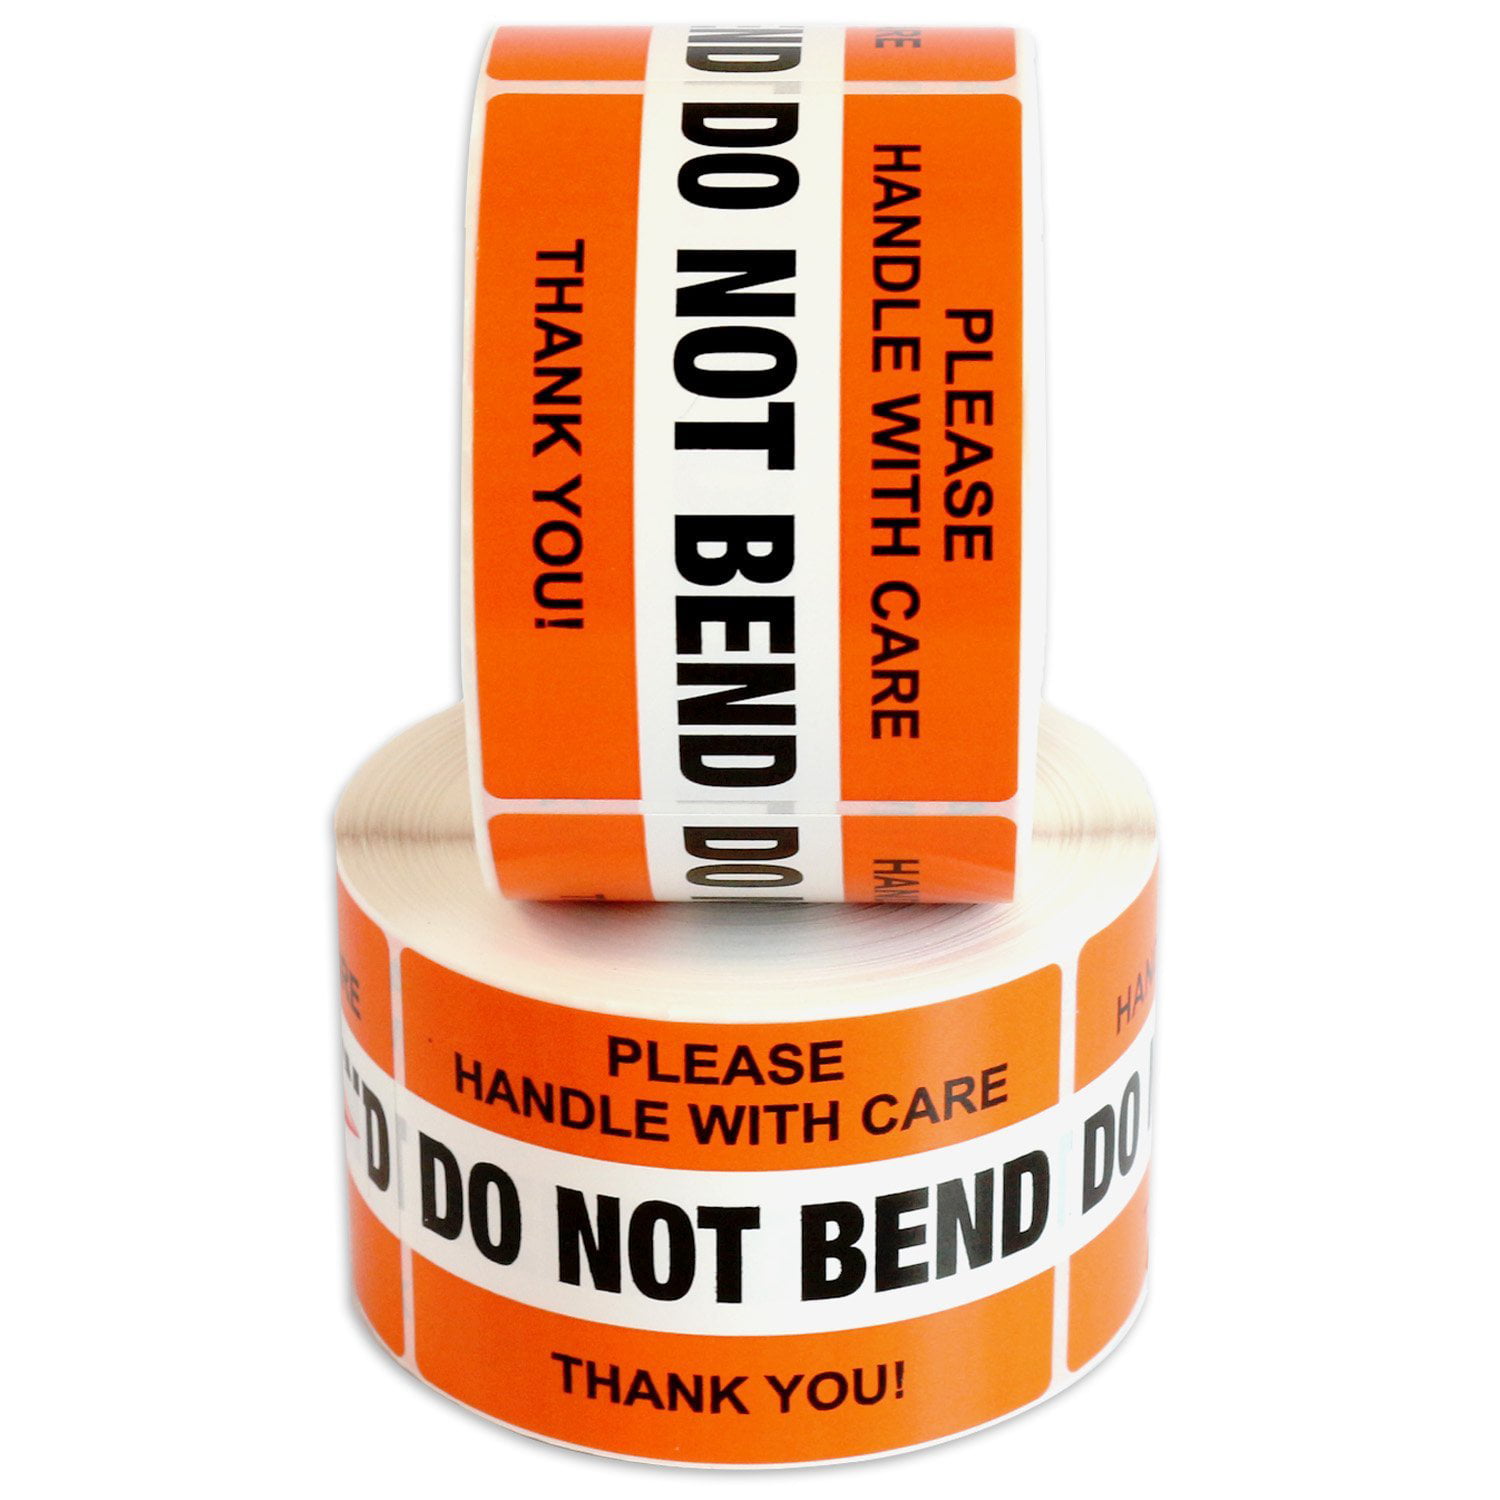 2 ROLLS DO NOT BEND STICKERS HANDLE WITH CARE 1“ x 3” SHIPPING 2000 LABELS 